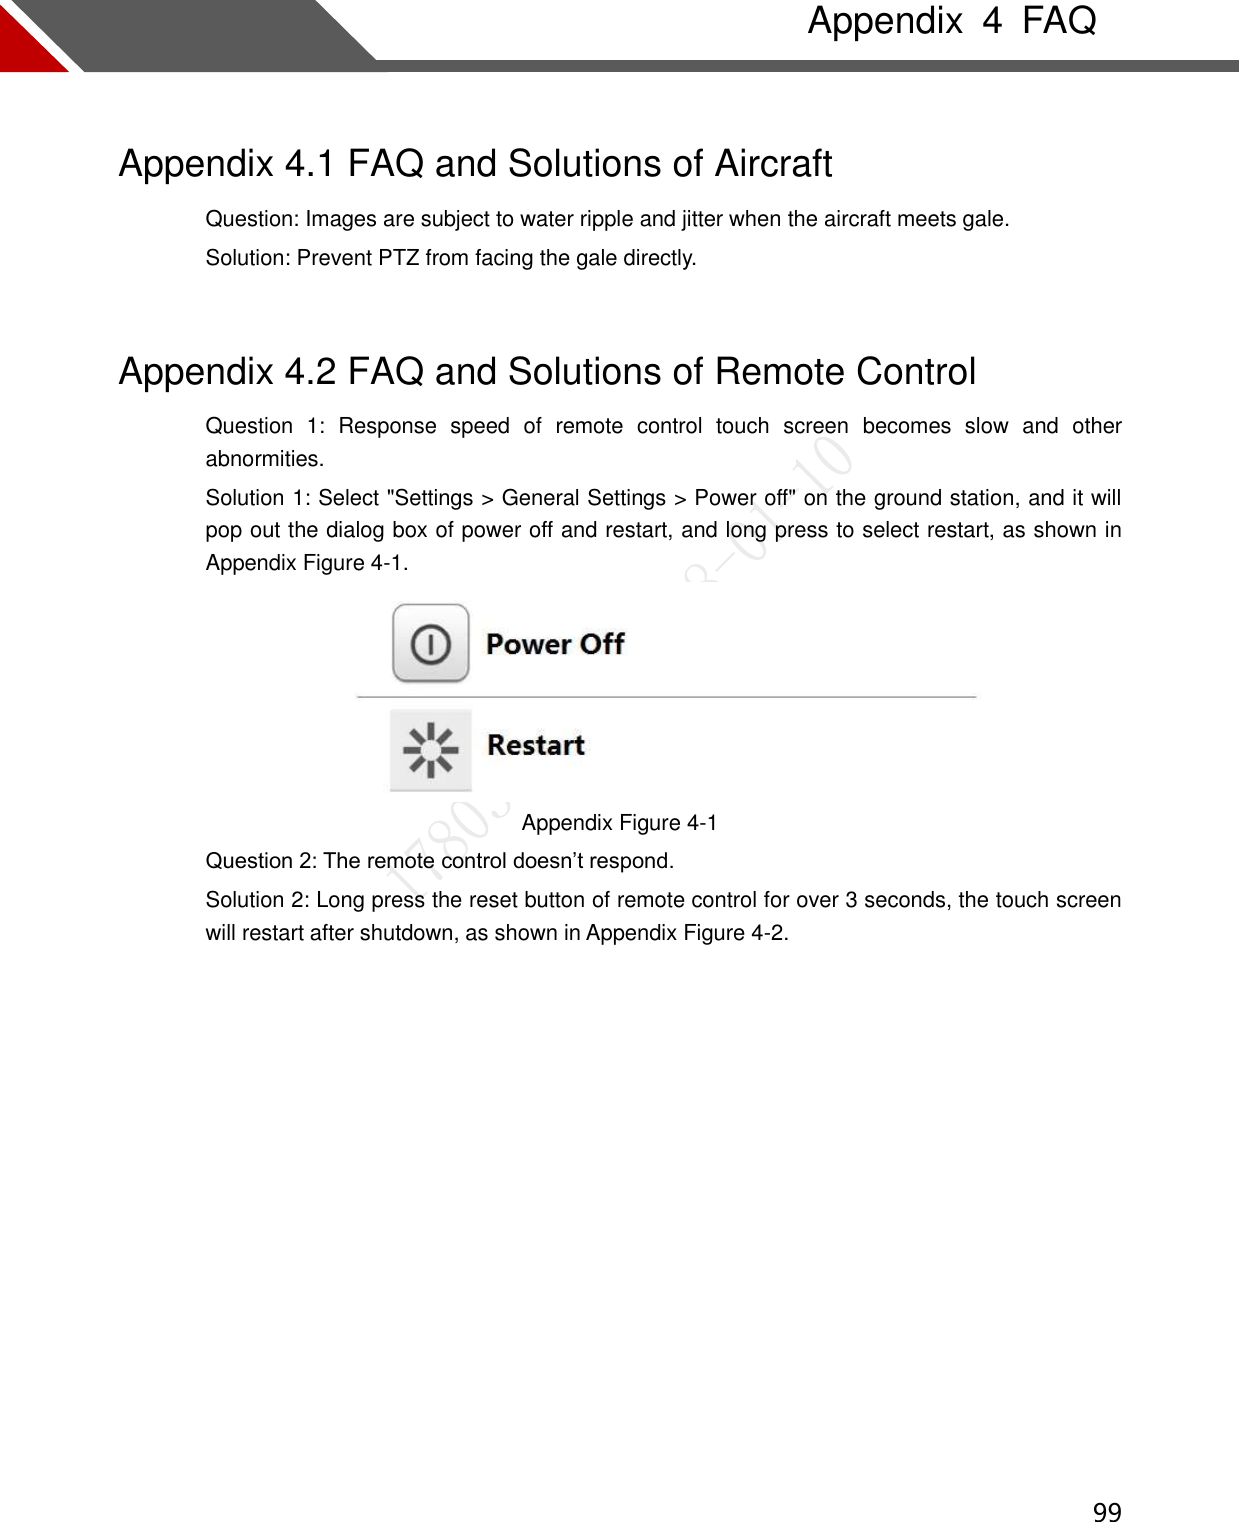  99   Appendix  4  FAQ Appendix 4.1 FAQ and Solutions of Aircraft Question: Images are subject to water ripple and jitter when the aircraft meets gale.   Solution: Prevent PTZ from facing the gale directly.   Appendix 4.2 FAQ and Solutions of Remote Control Question  1:  Response  speed  of  remote  control  touch  screen  becomes  slow  and  other abnormities. Solution 1: Select &quot;Settings &gt; General Settings &gt; Power off&quot; on the ground station, and it will pop out the dialog box of power off and restart, and long press to select restart, as shown in Appendix Figure 4-1.  Appendix Figure 4-1 Question 2: The remote control doesn’t respond. Solution 2: Long press the reset button of remote control for over 3 seconds, the touch screen will restart after shutdown, as shown in Appendix Figure 4-2.   